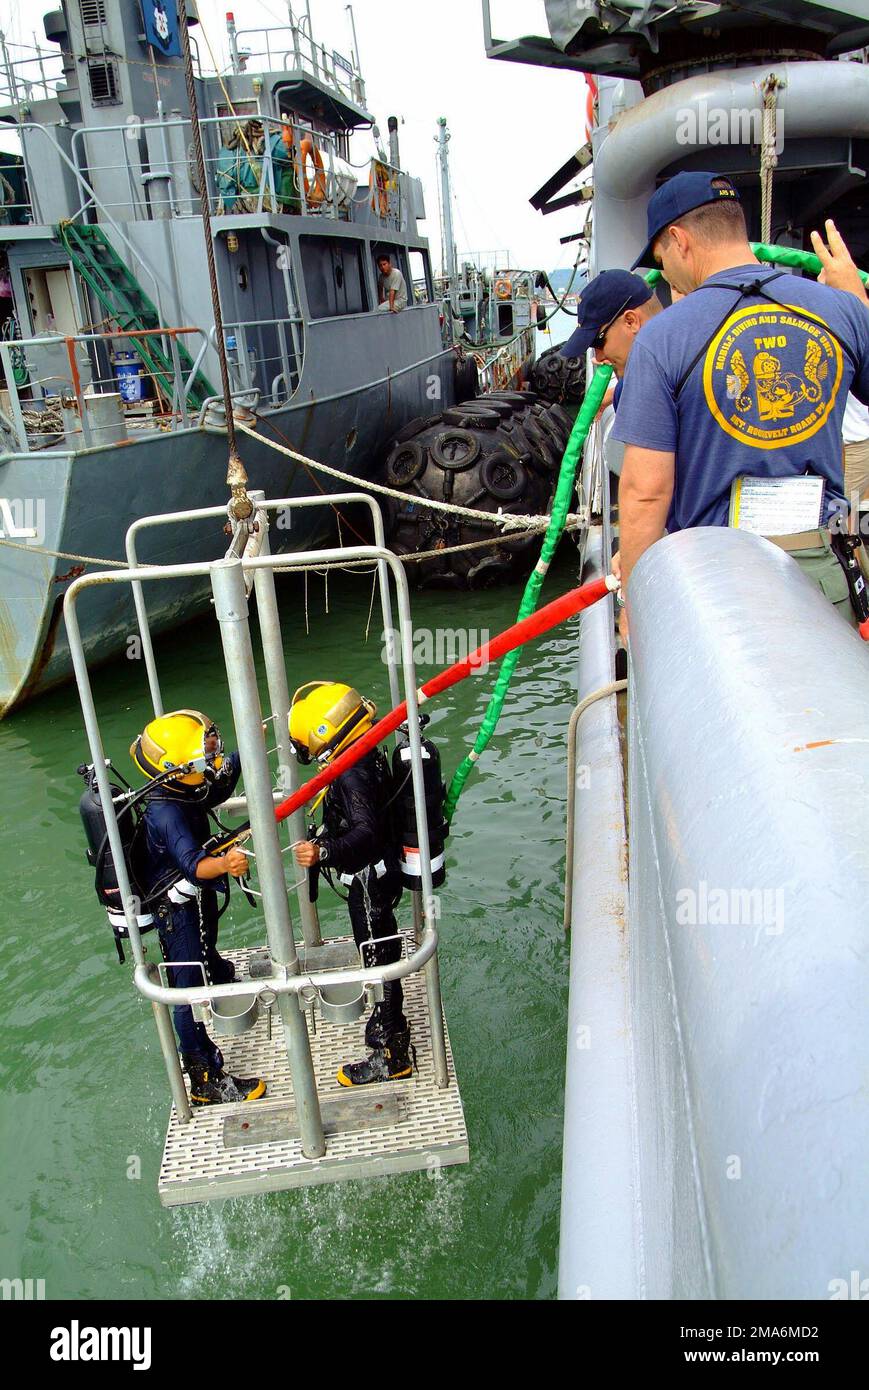 Two Royal Brunei Navy (RBN) Divers stand aboard a diving cage while being lowered into the water from the US Navy (USN) Salvage Ship, USS SAFEGUARD (ARS 50) during familiarization dives conducted during the Brunei phase of Cooperation Afloat Readiness and Training (CARAT). CARAT is an annual series of bilateral military training exercises with several Southeast Asian nations designed to enhance interoperability of the respective sea services. Base: USS Safeguard (ARS 50) Country: Brunei Darussalam (BRN) Stock Photo